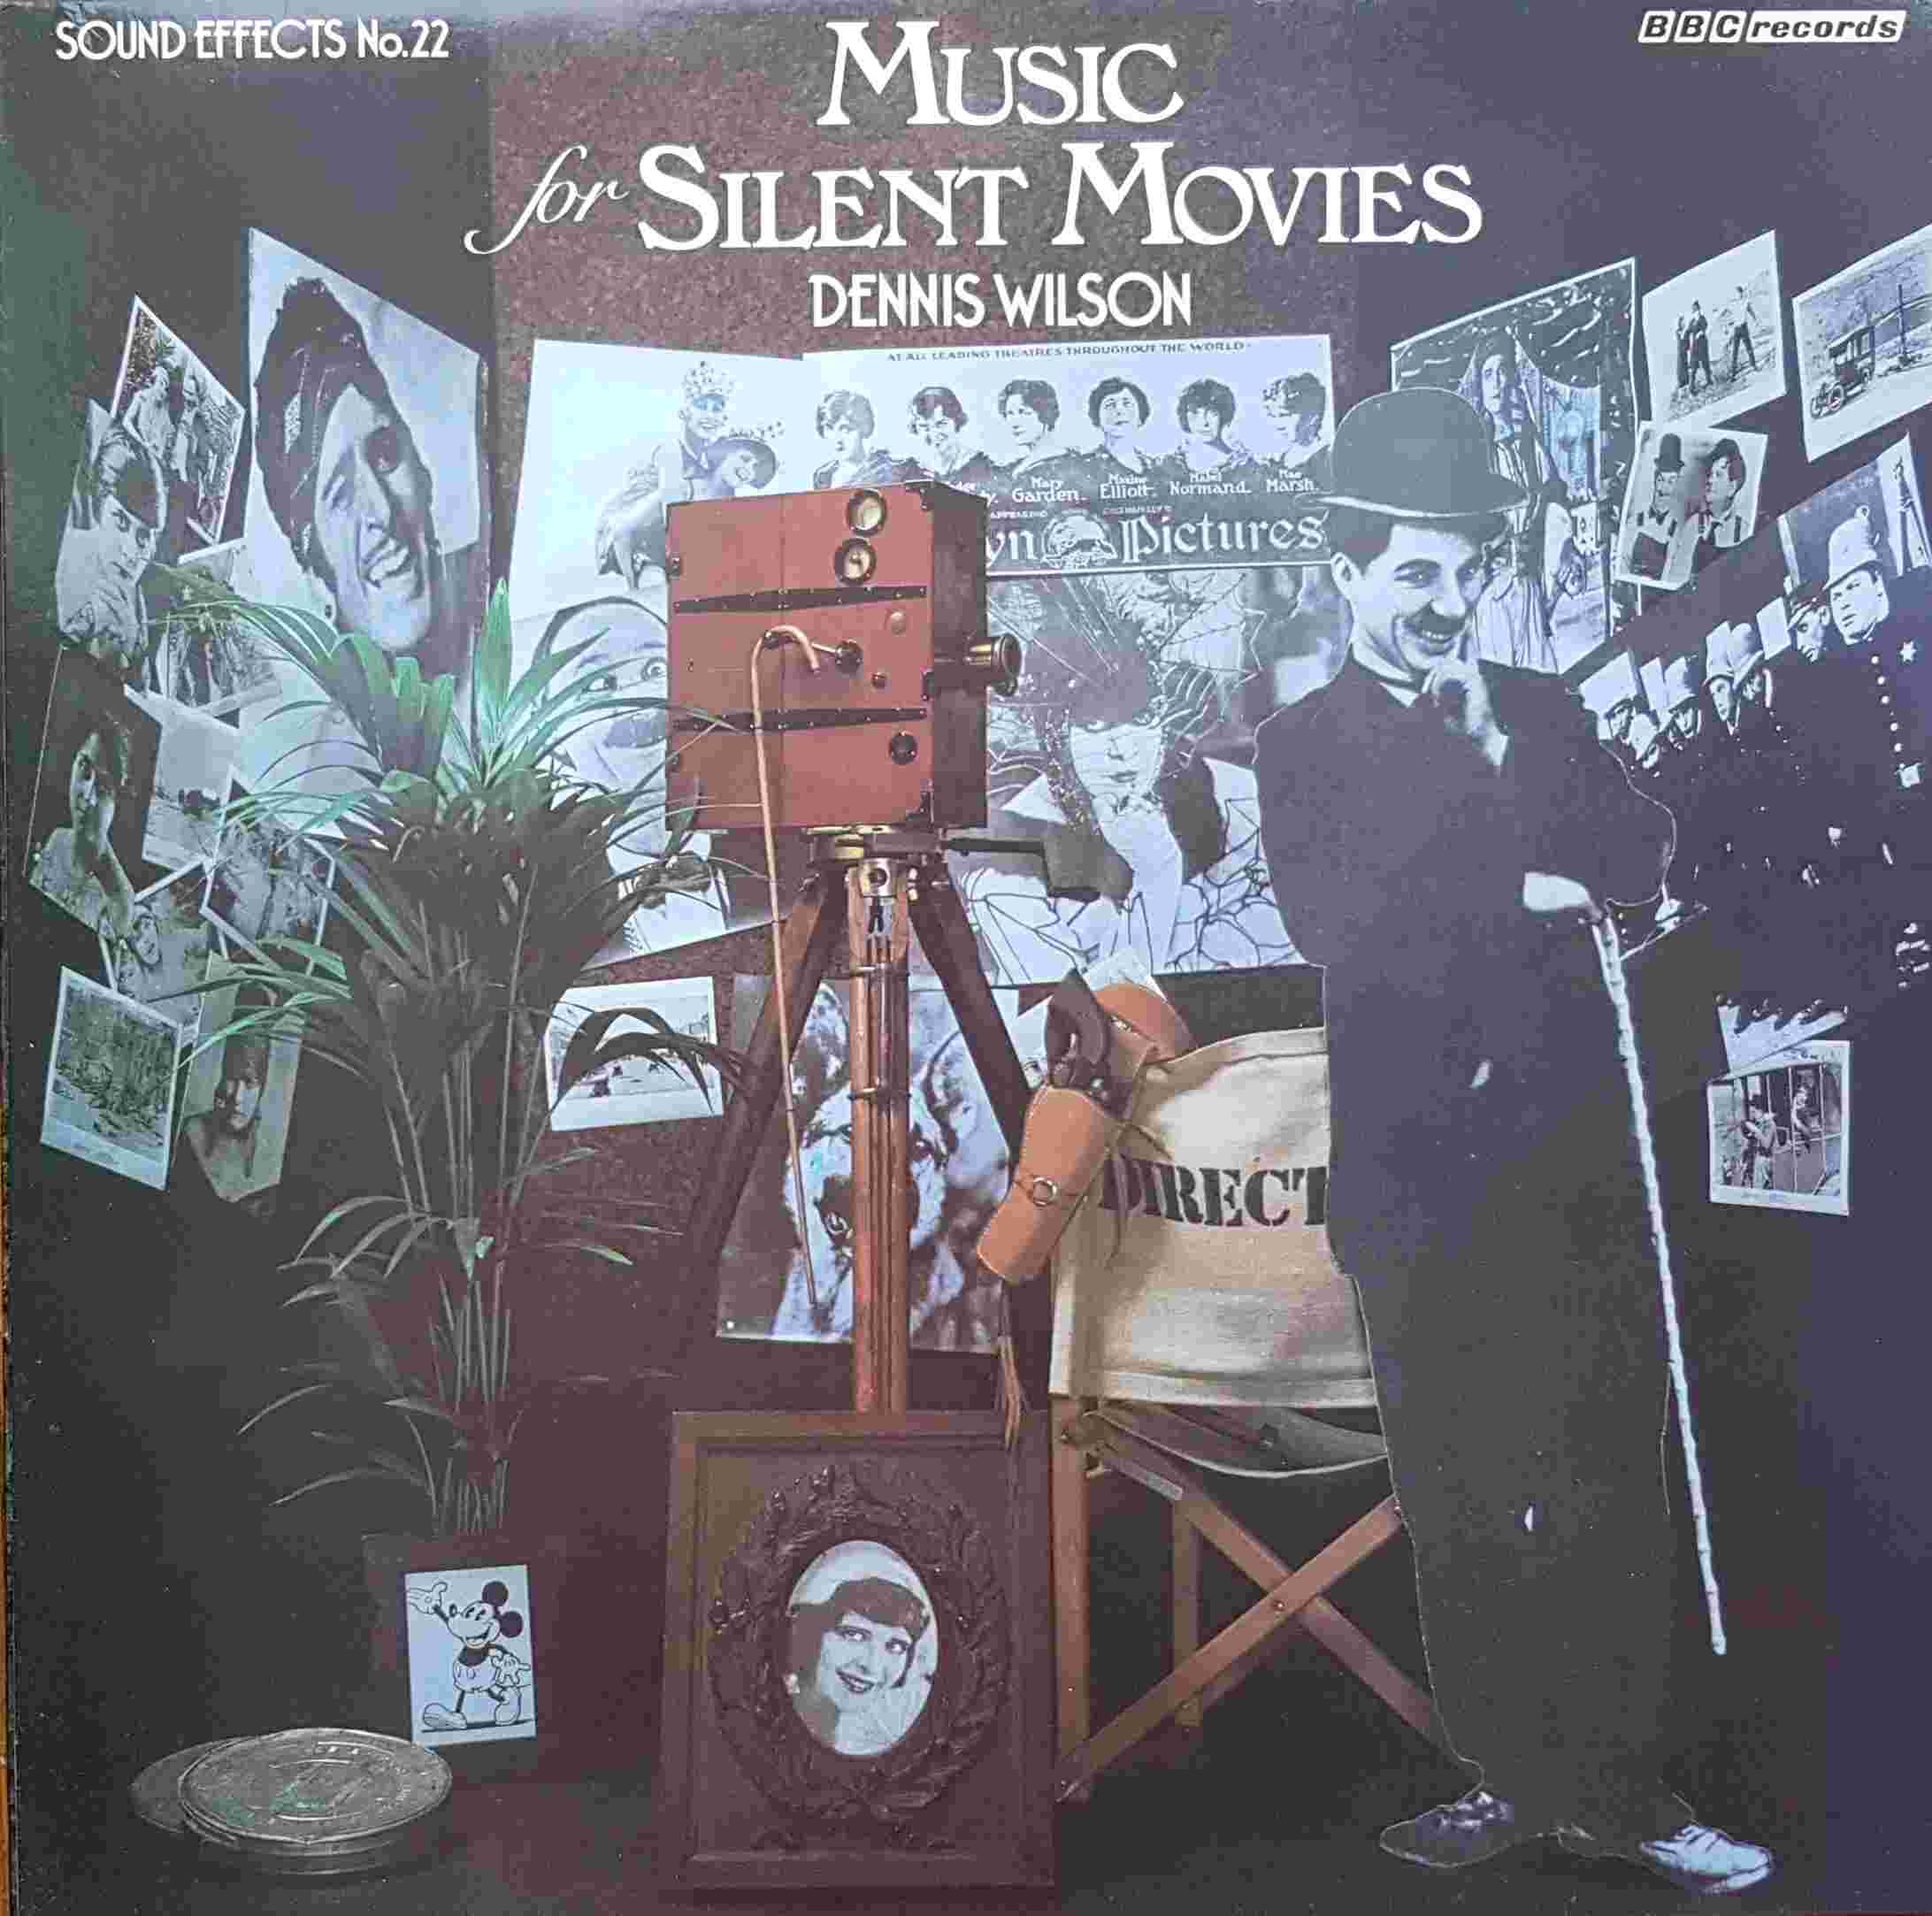 Picture of REC 347 Music for silent movies (Sound effects no. 22) by artist Dennis Wilson from the BBC albums - Records and Tapes library